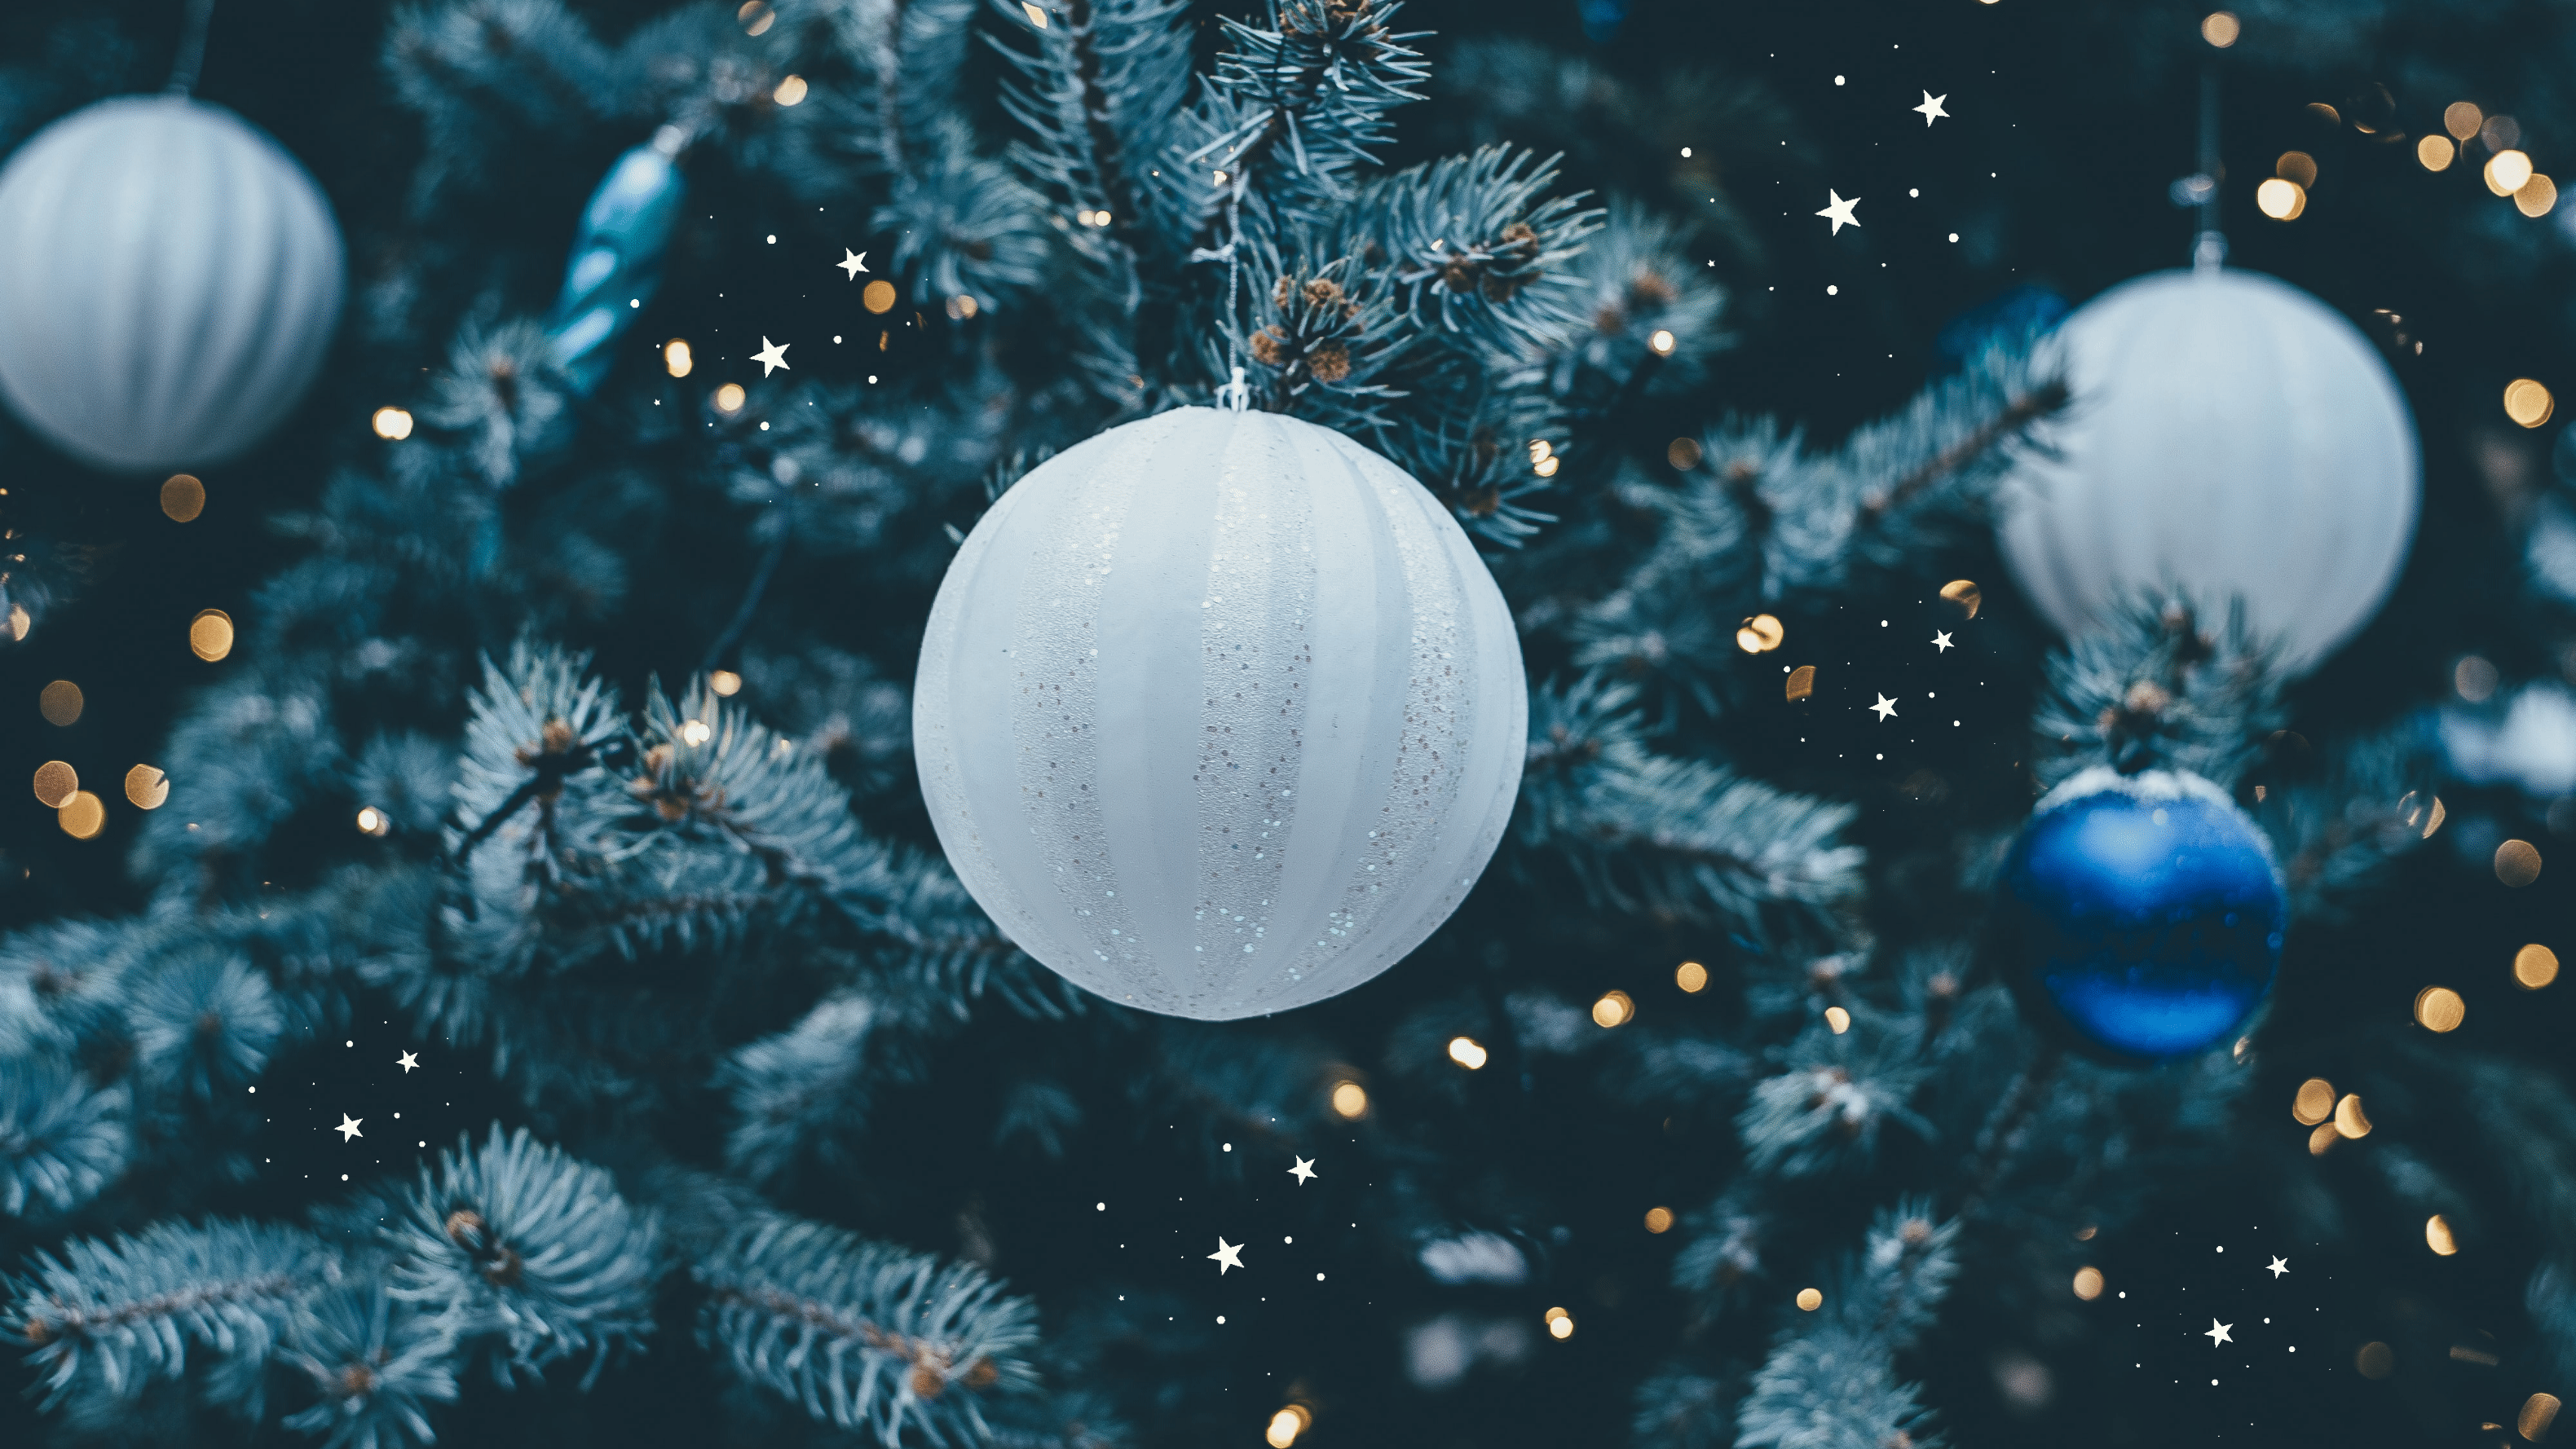 Christmas Backgrounds for Your Phone, Computer, or Zoom Meeting